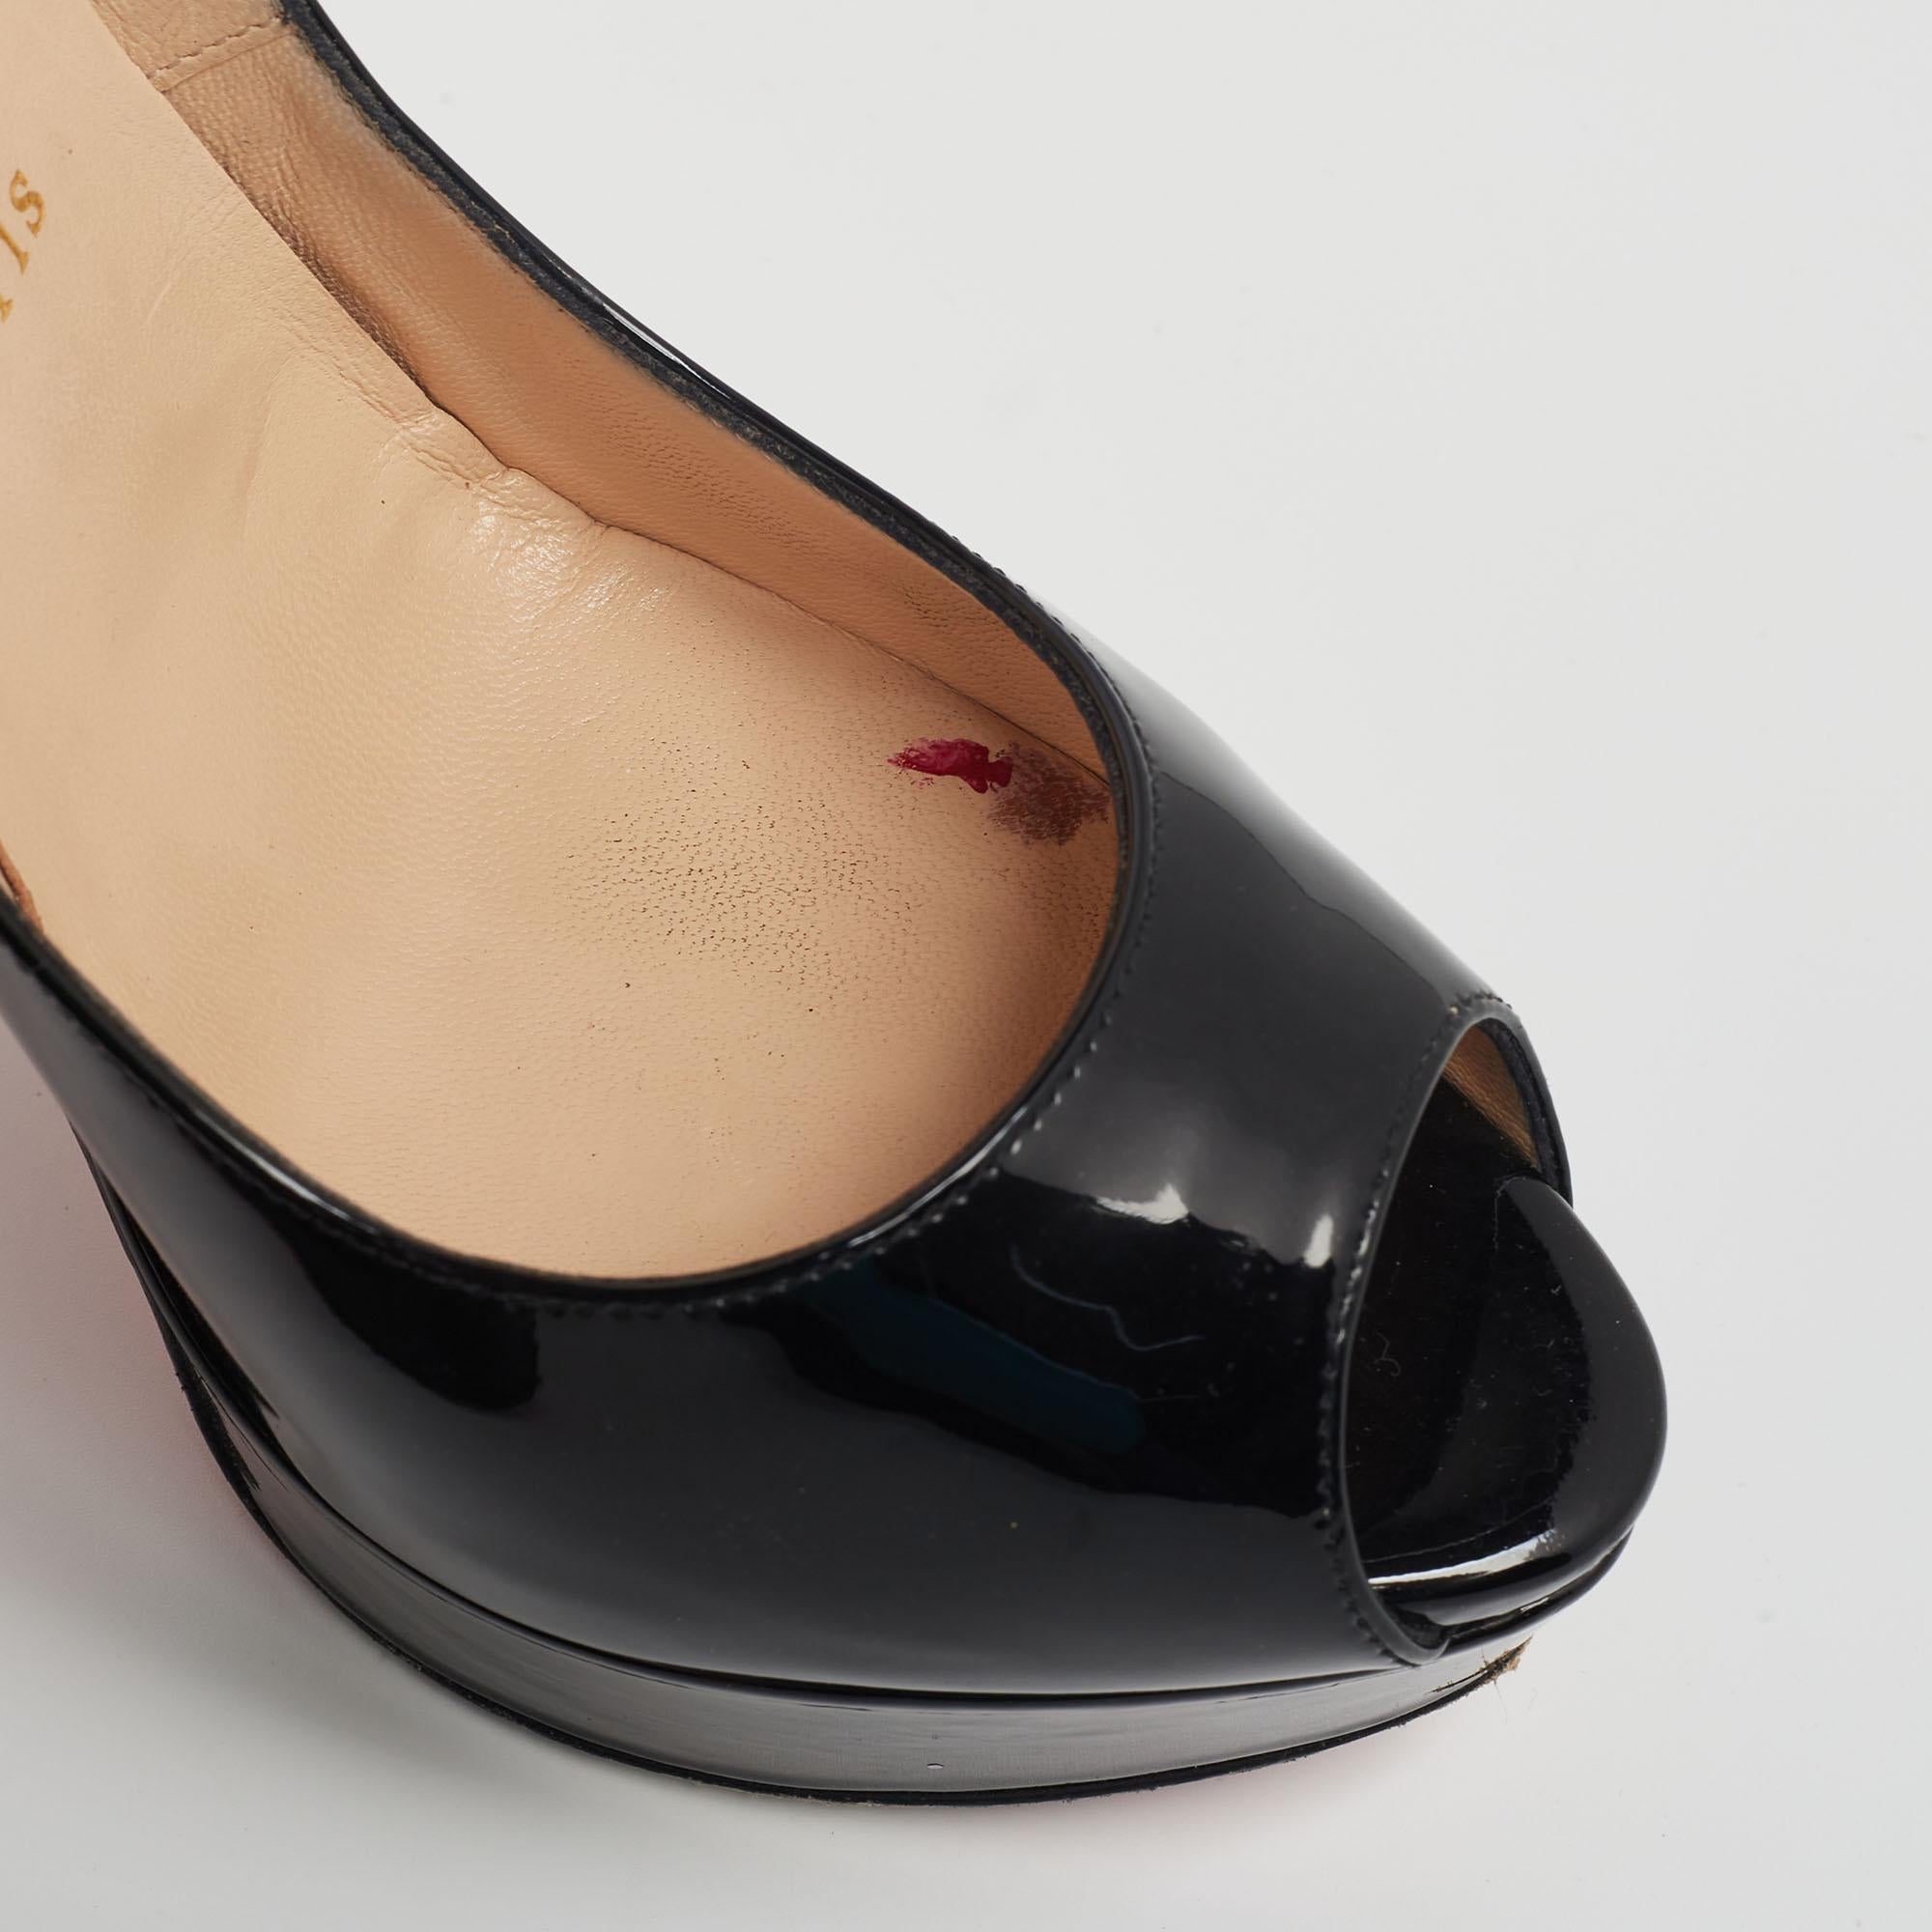 Christian Louboutin Black Patent Leather Lady Peep-Toe Pumps Size 38 For Sale 4